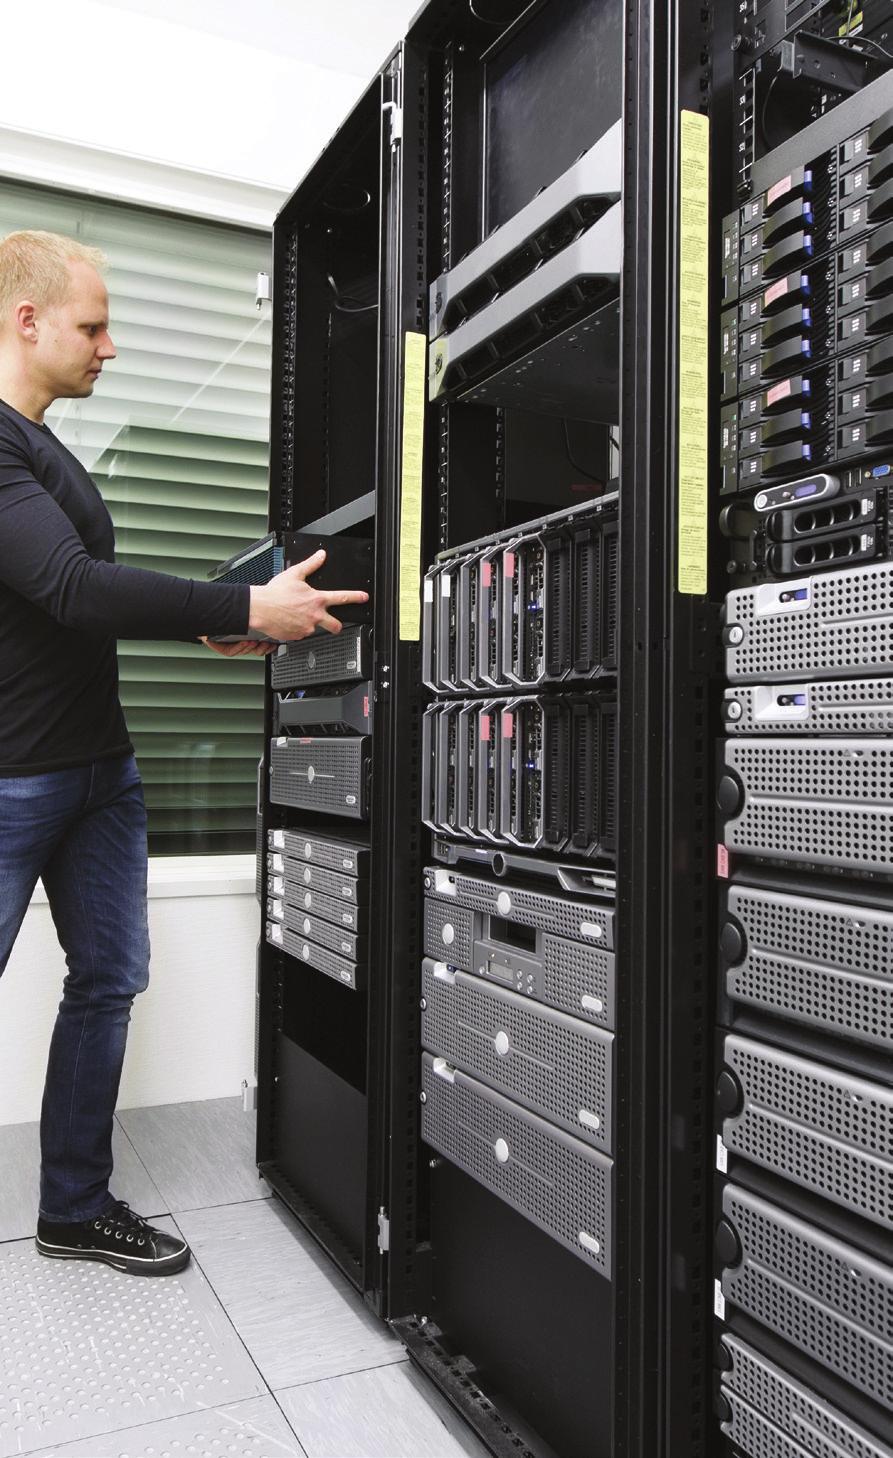 Smart Storage Solutions Overview Smart Storage Performance, Power, and Reliability With the massive growth of data centers, performance, power, and